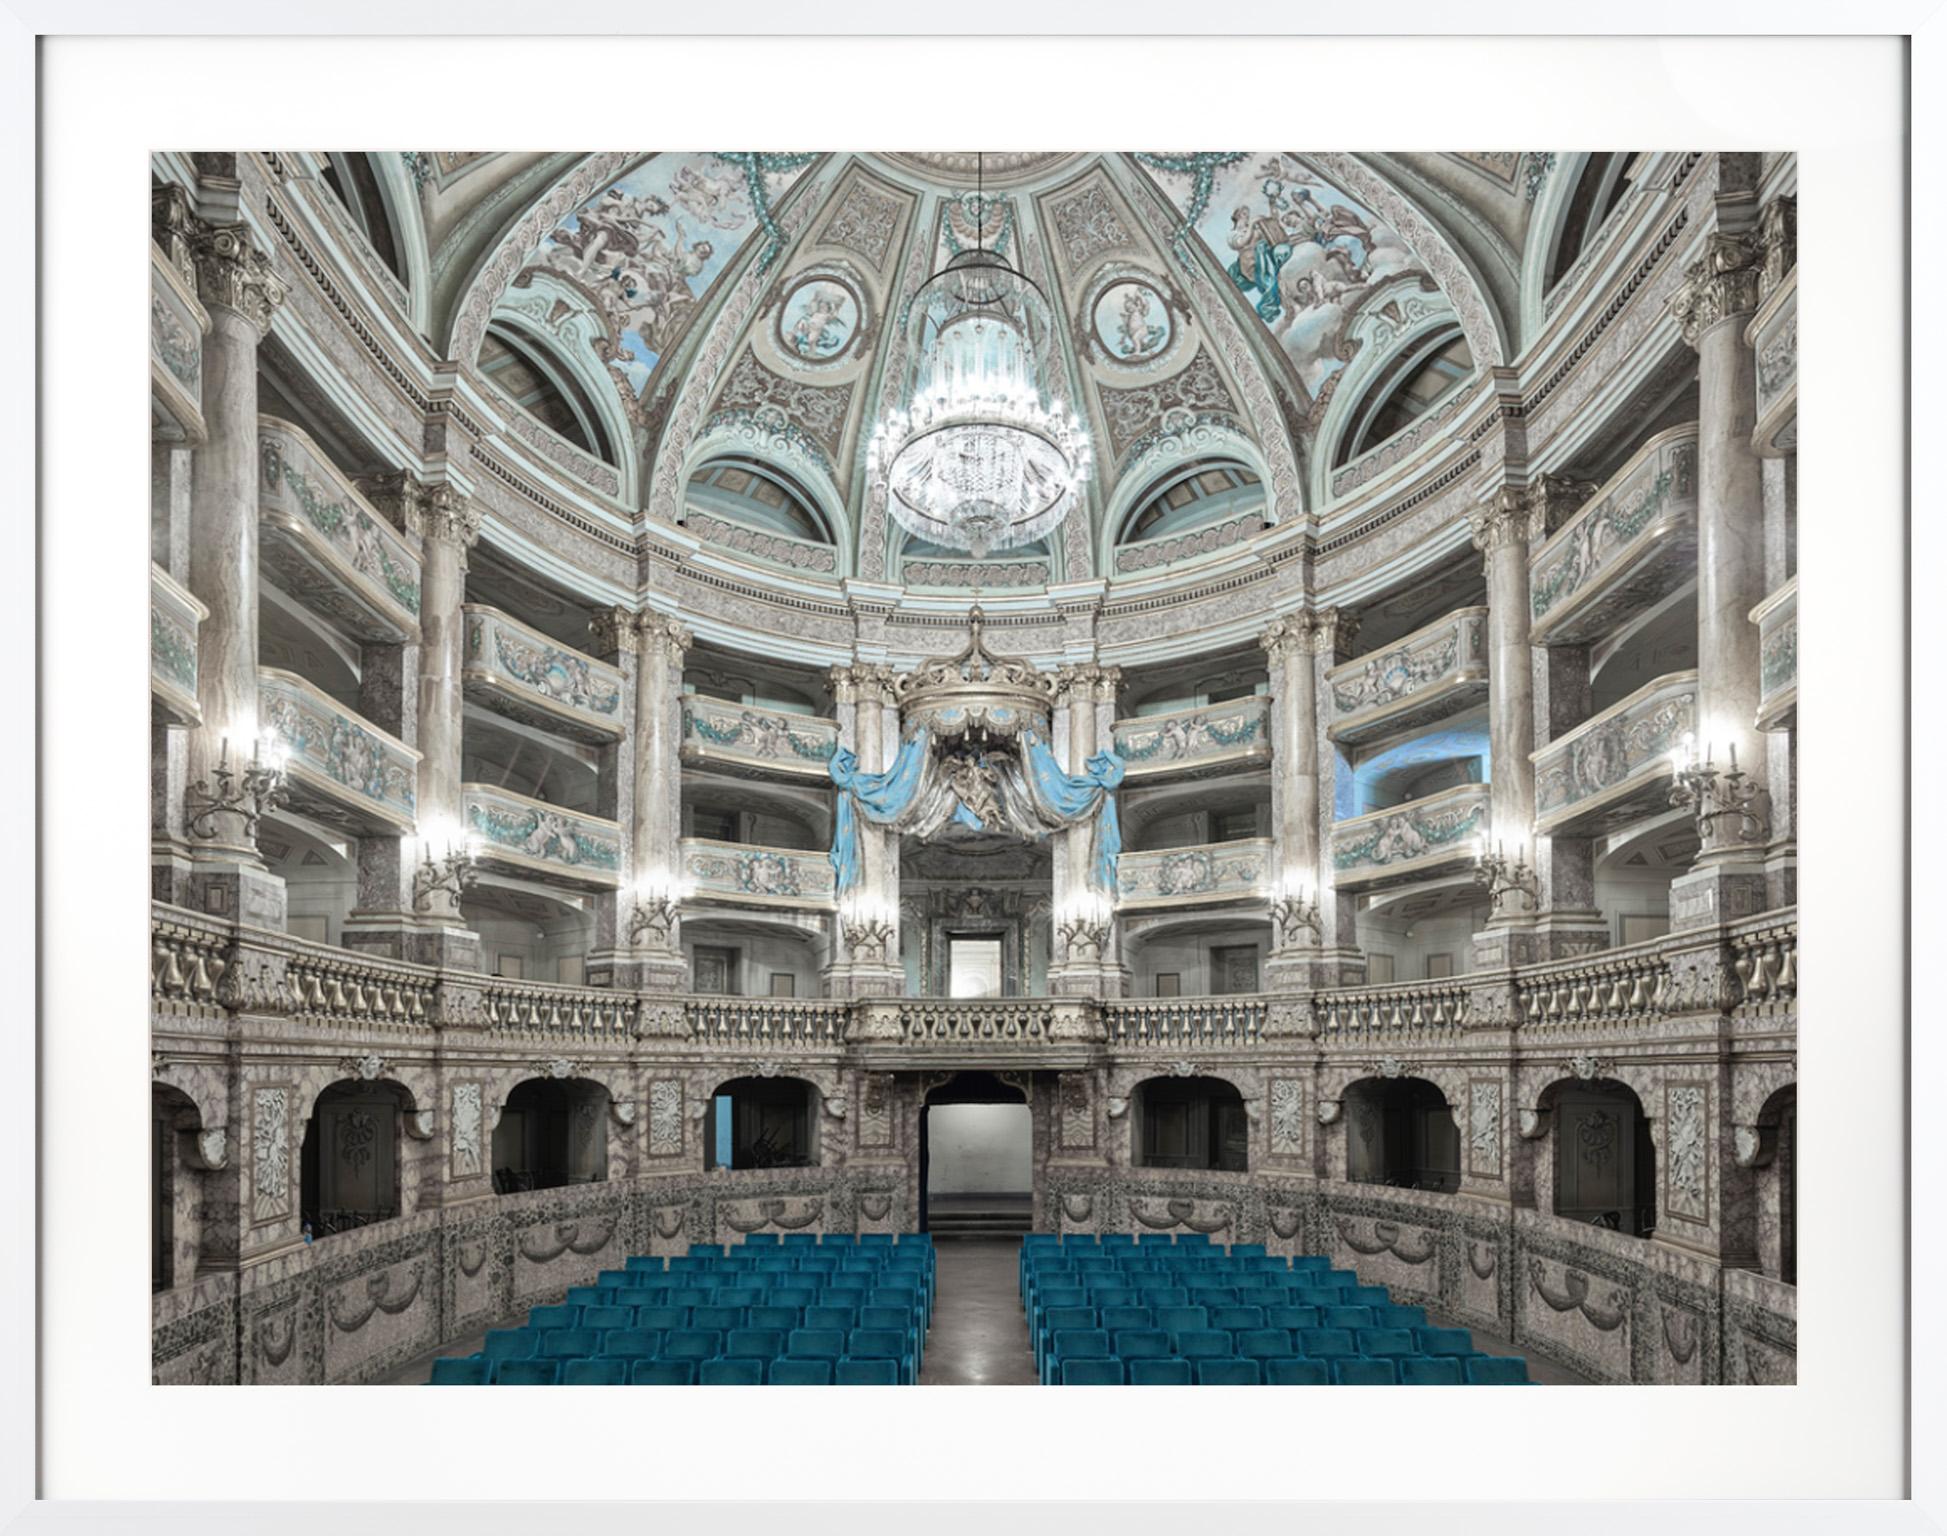 David Burdeny Landscape Photograph - "Royal Palace of Caserta Theatre" Photograph of Italian Palace from 18th Century